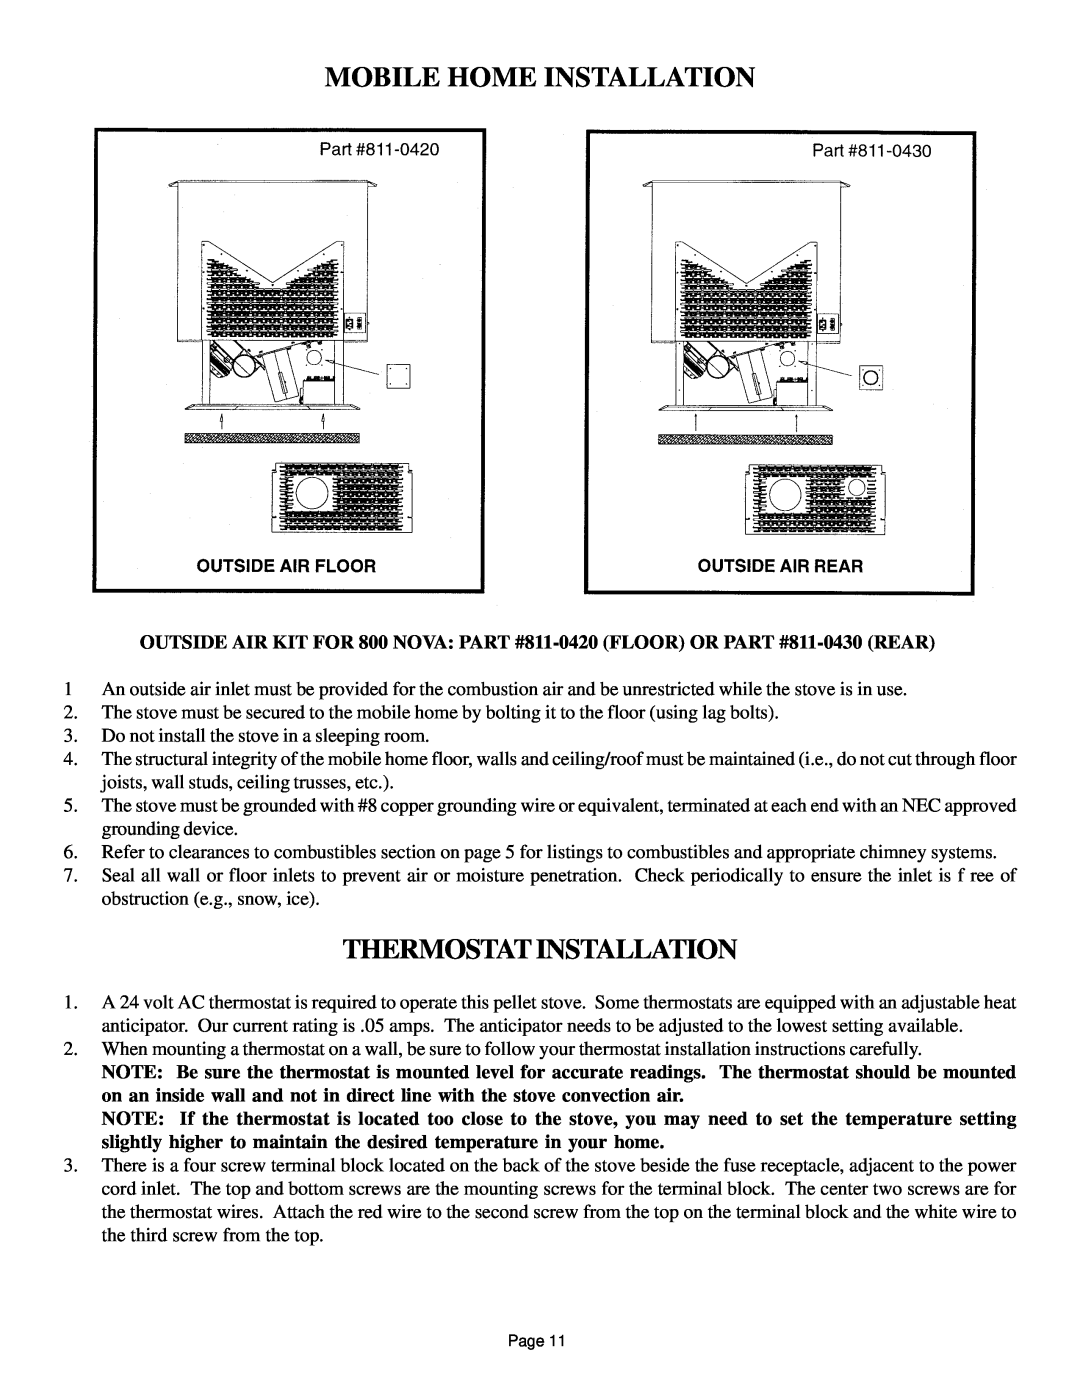 Hearth and Home Technologies 800 owner manual Mobile Home Installation, Thermostat Installation 